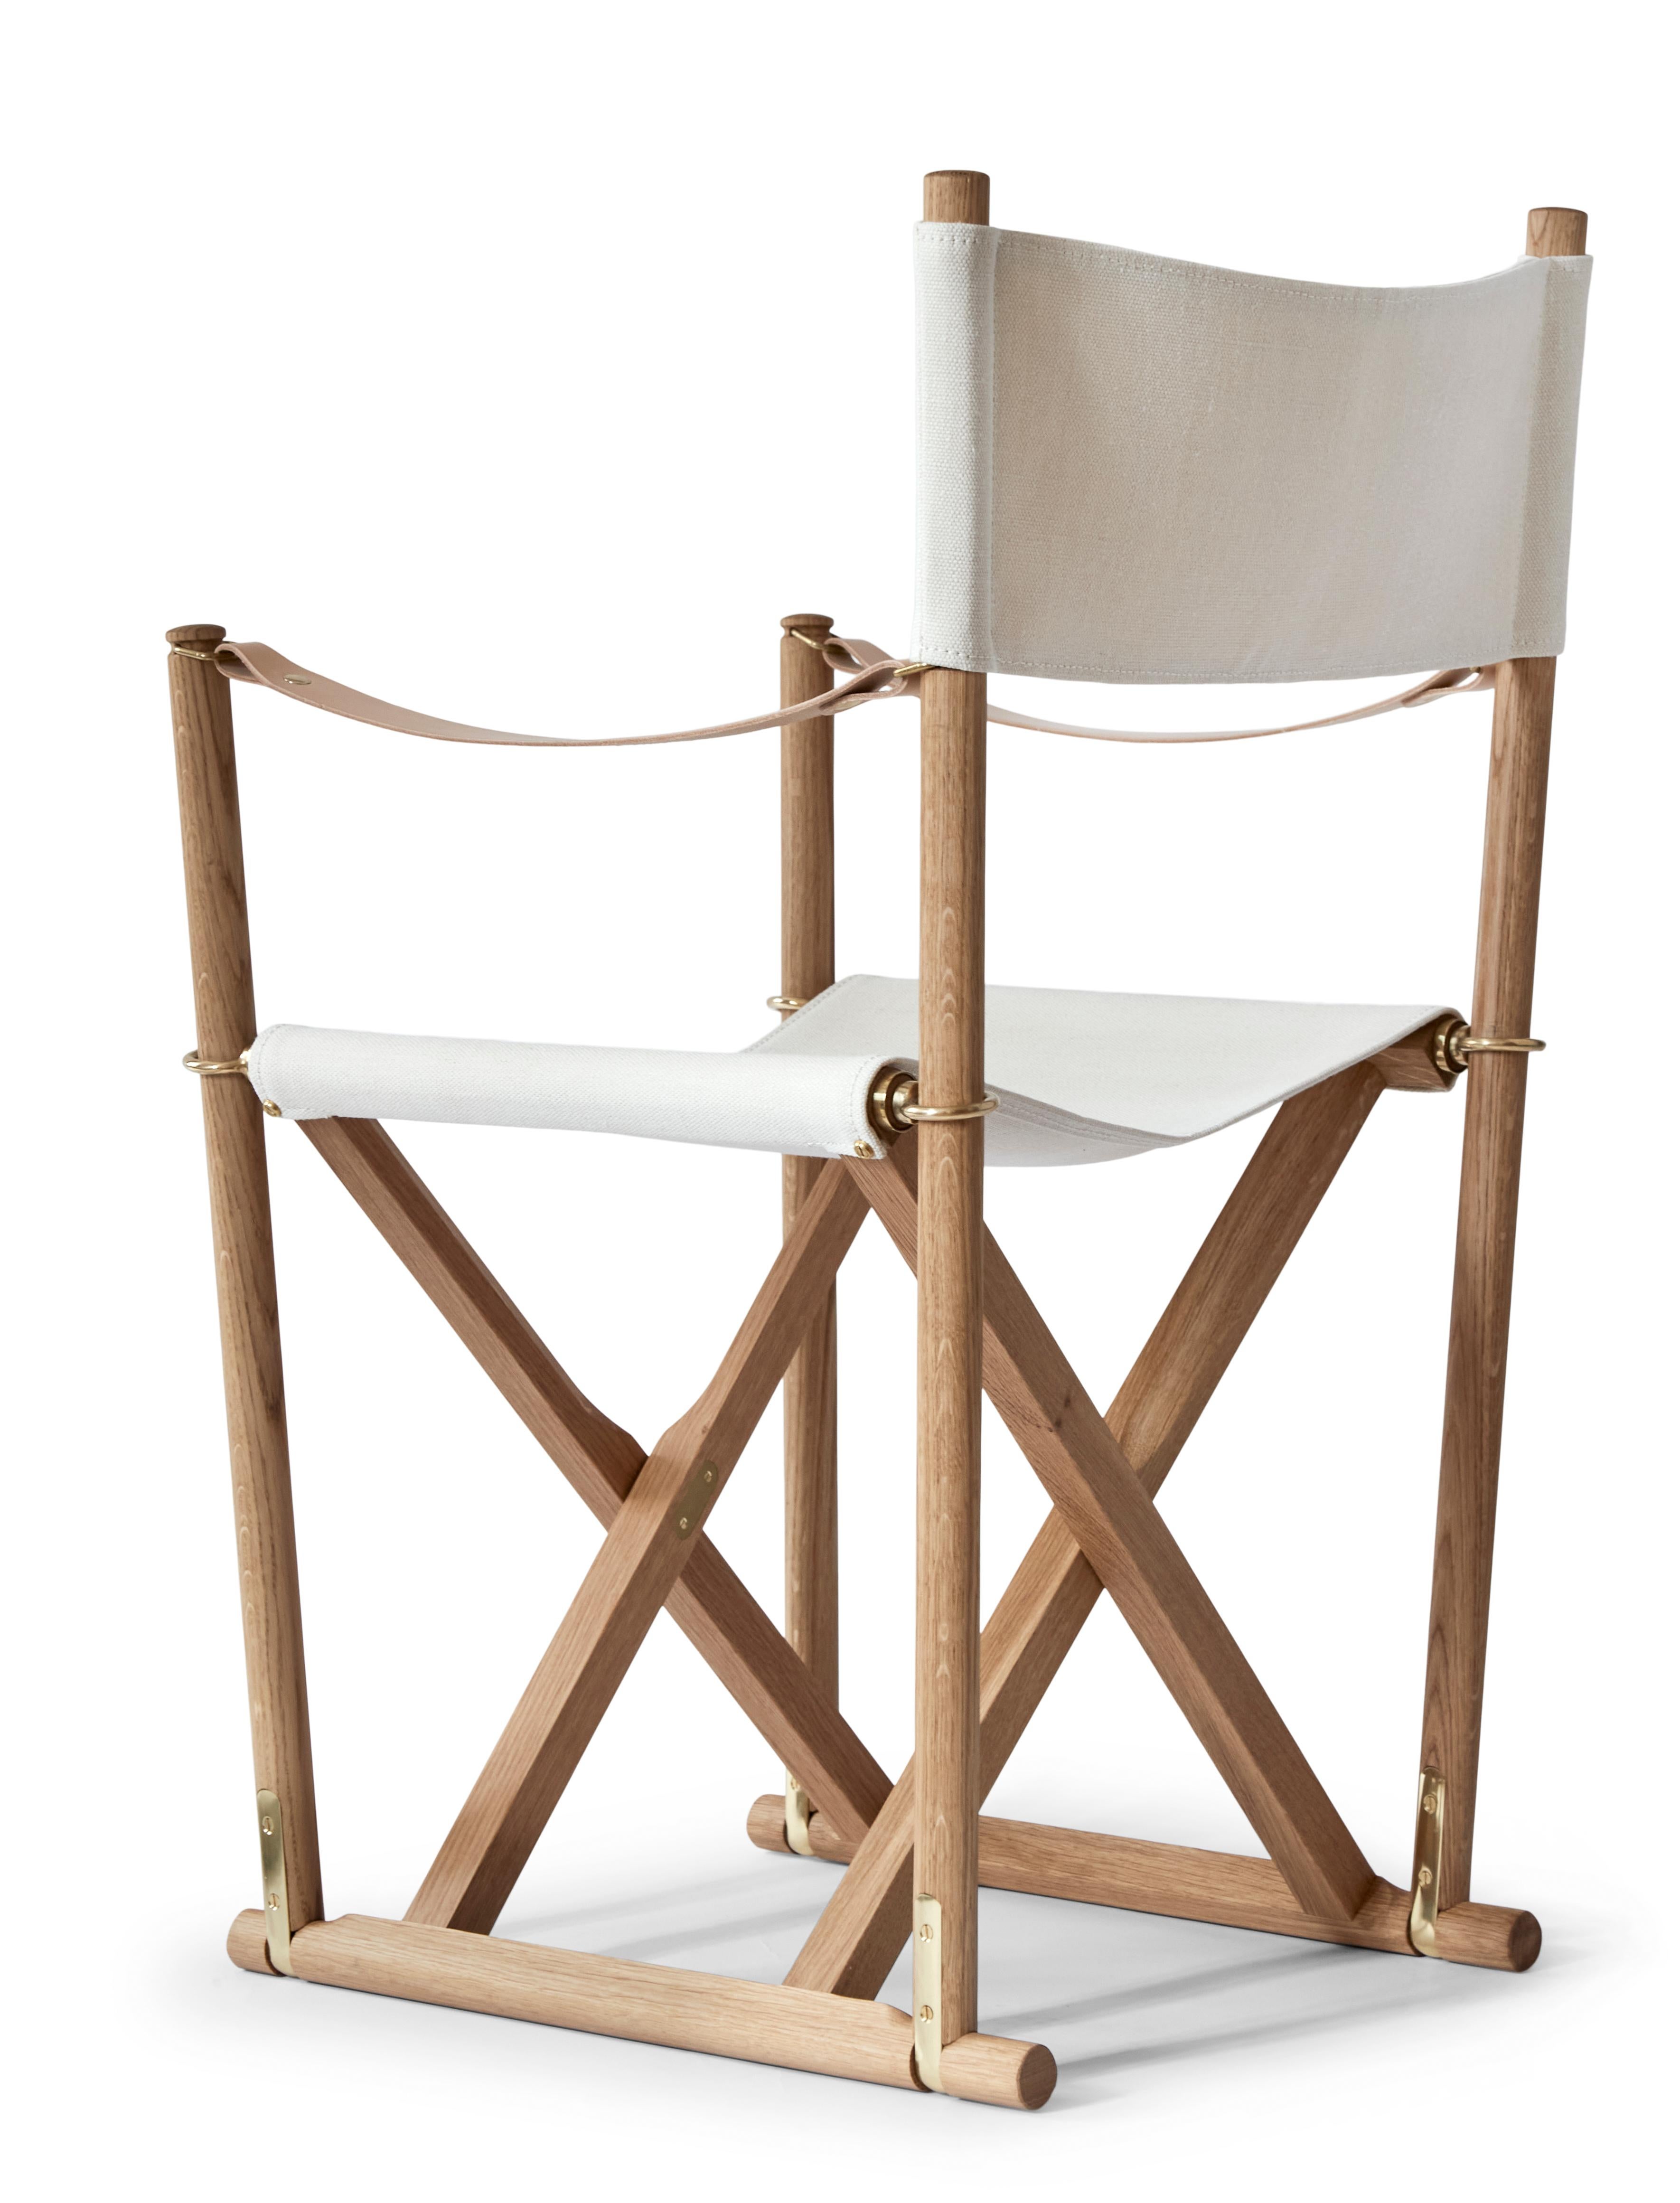 Mogens Koch designed the MK16 folding chair for a supplemental church seating contest, reinterpreting the traditional folding stool by pairing easy folding and storage functionality with modern aesthetics. The forward-thinking concept was deemed too